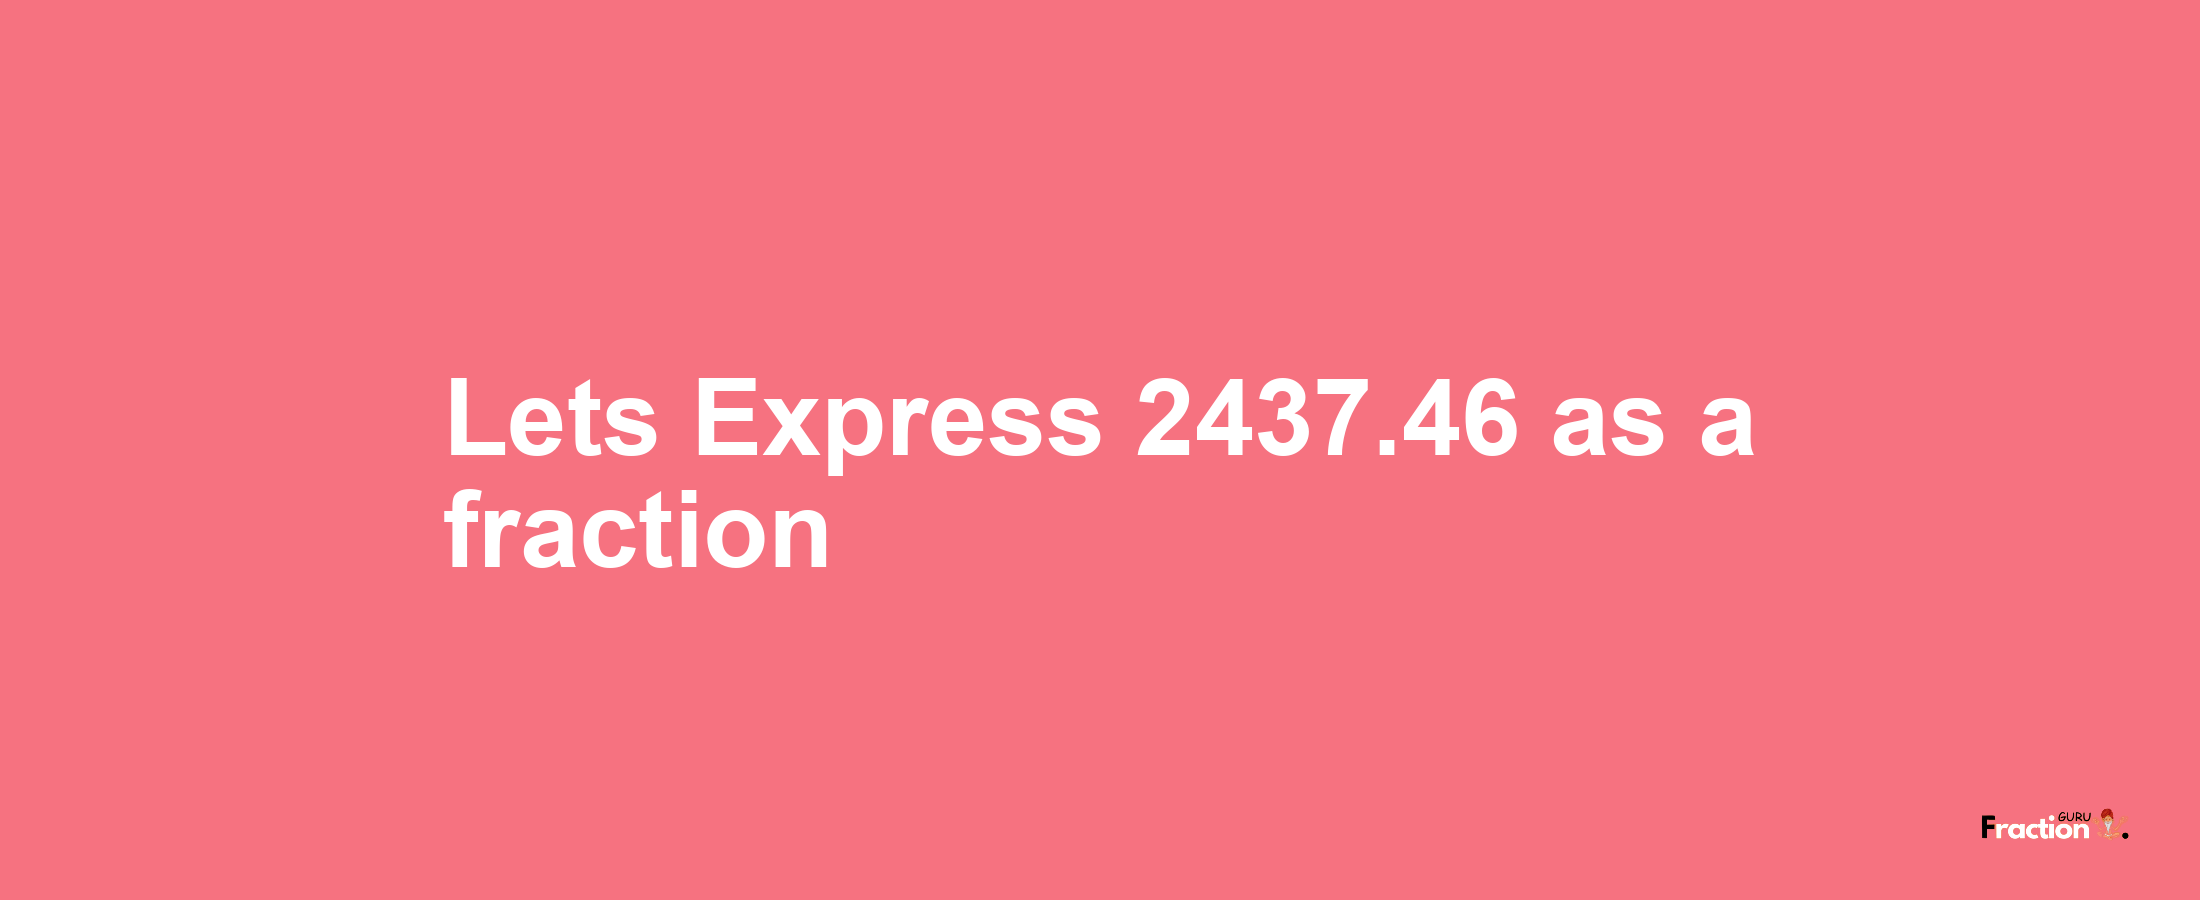 Lets Express 2437.46 as afraction